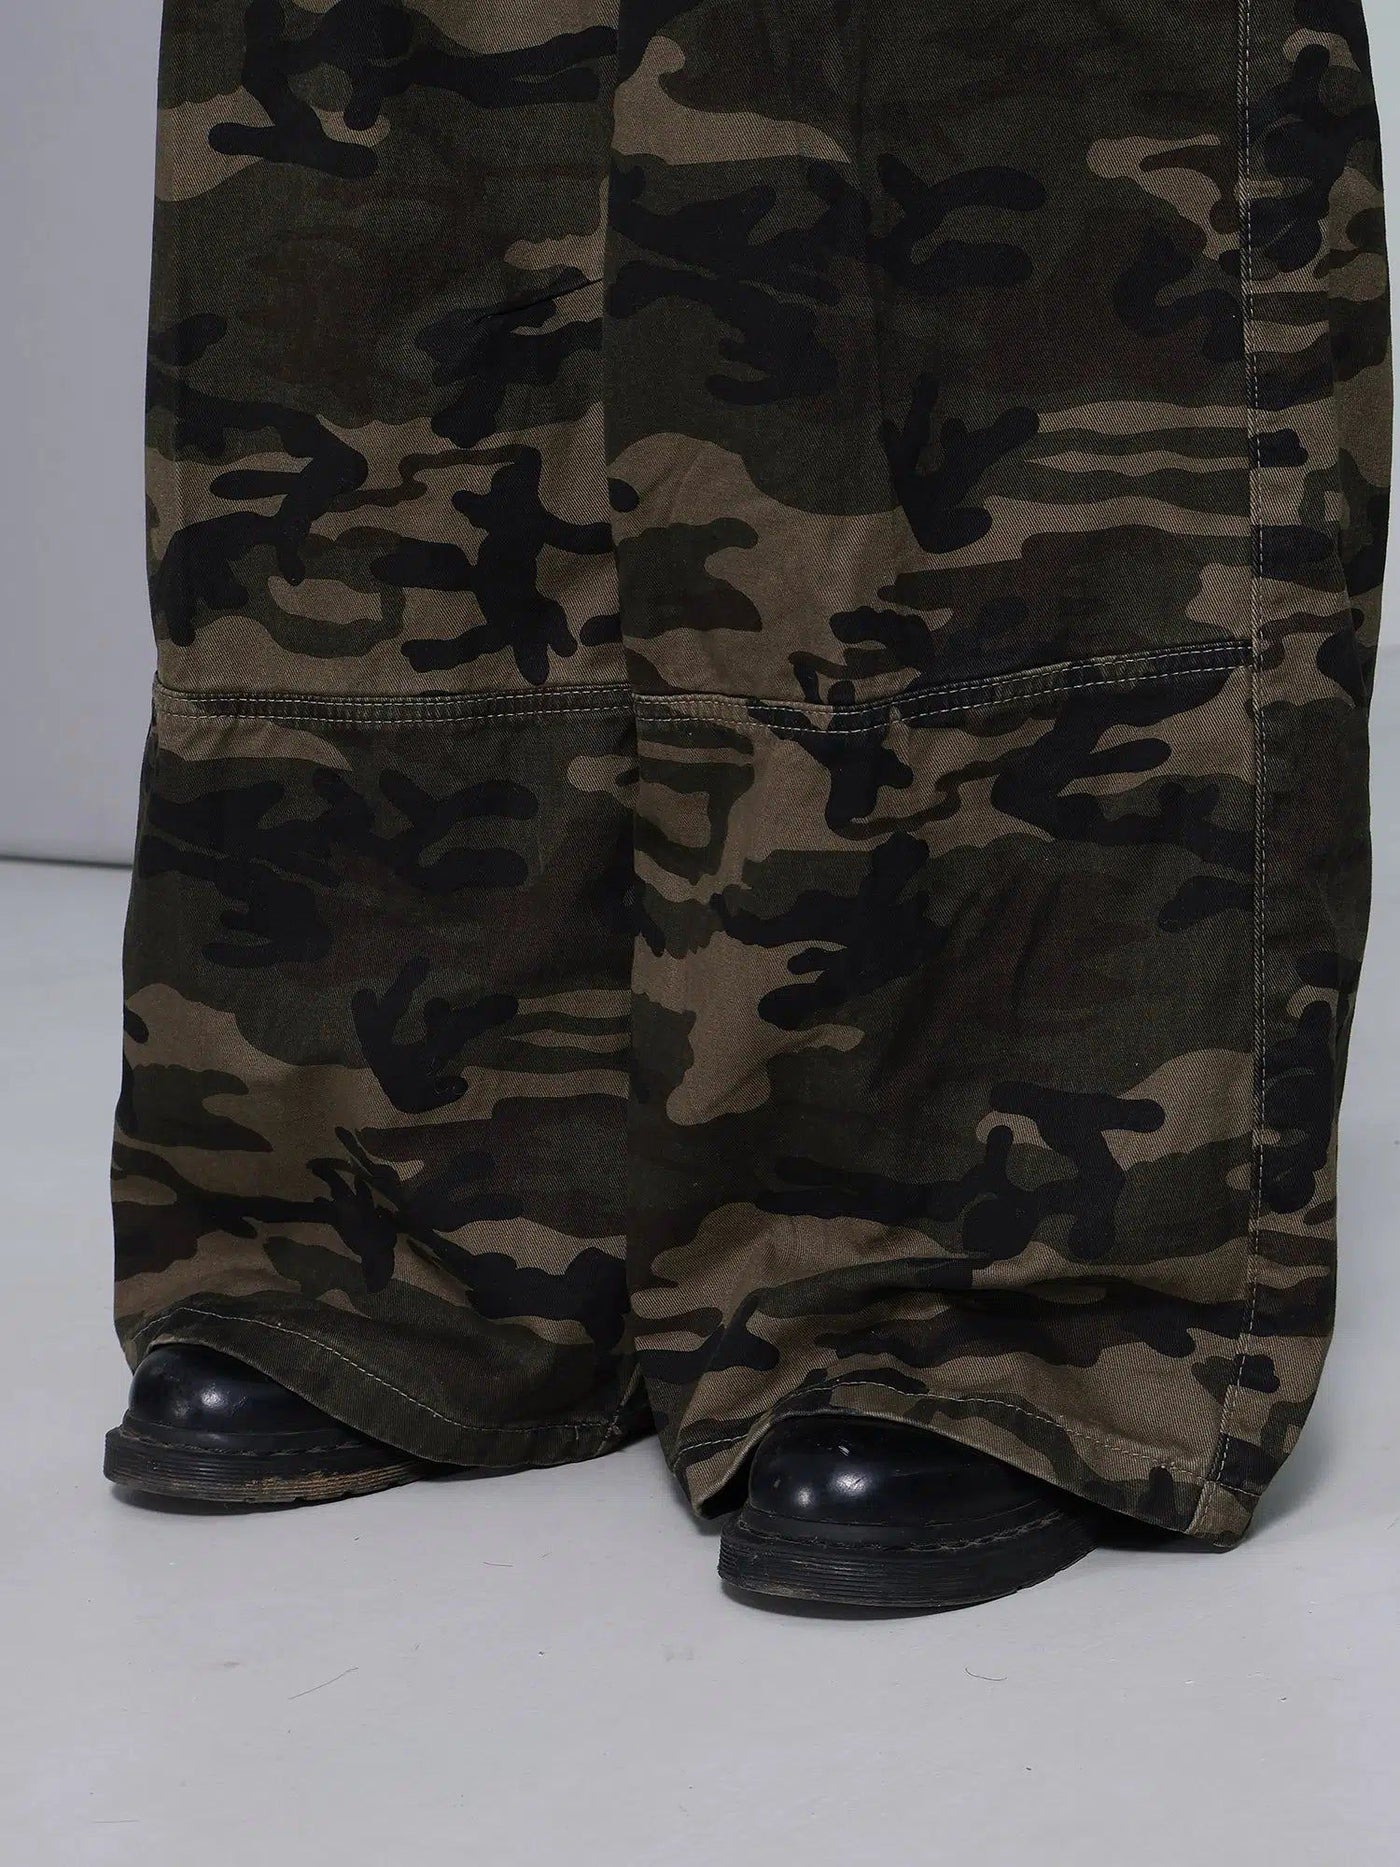 Wide Camouflage Cargo Pants Korean Street Fashion Pants By Jump Next Shop Online at OH Vault